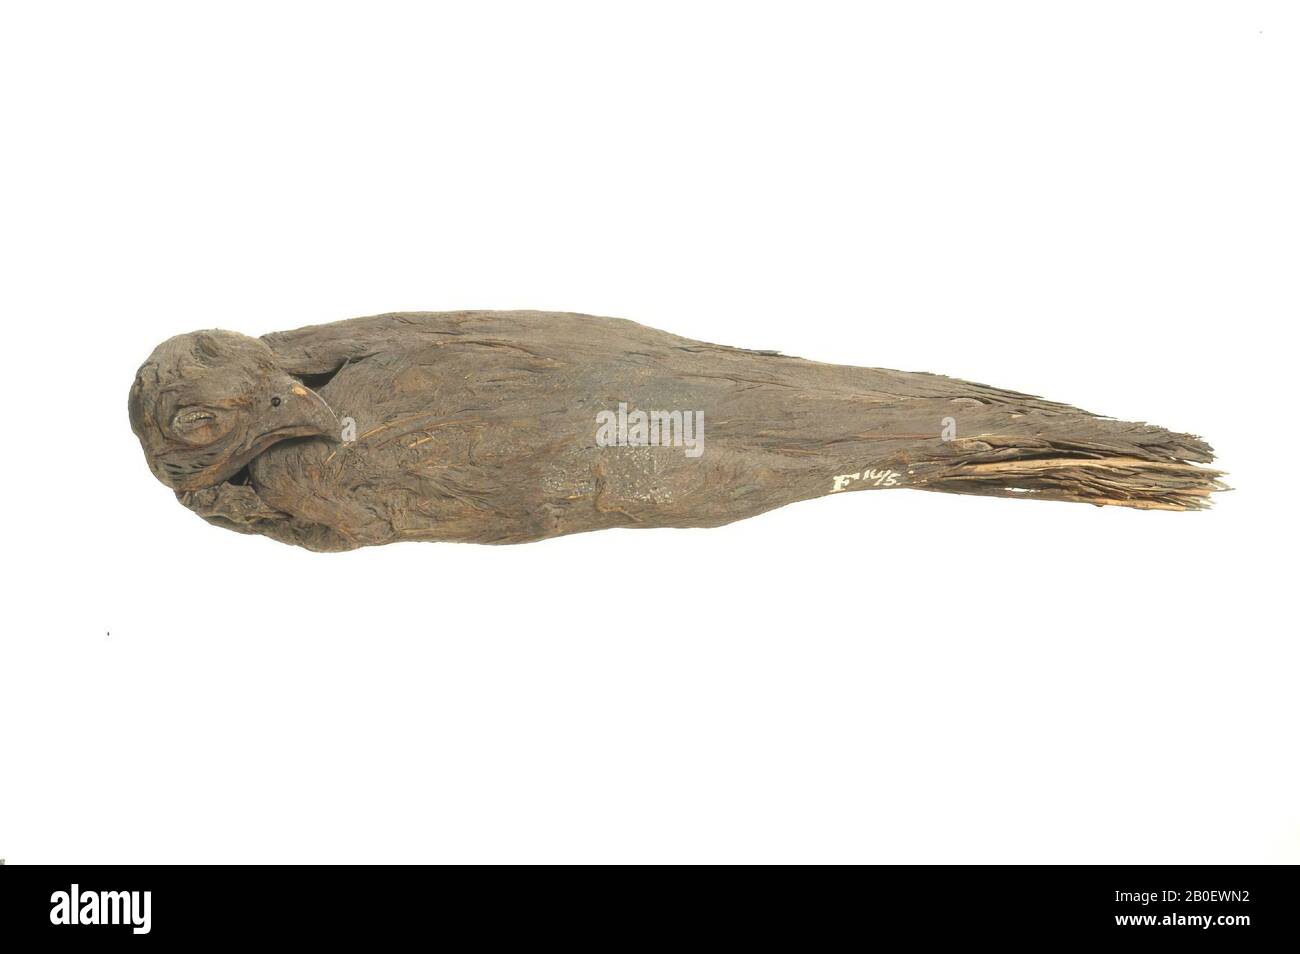 falcon, The mummy has been unwrapped and stretched (2.2 cm square) adhering to the back of the neck betrays that it was in fact wrapped originally. The body of the bird is well preserved, folded over the belly. The claws of the feet are just visible through a gap in the feathers. The head has been flexed on the chest, slightly twisted to the right. The bill is intact, the nostrils are open, the eyes three out to half-opened slits. The feathers are stuck together to form a hard mass, dark brown in color., Mummy, bird, mummy, 4.5 x 5.1 x 22.5 cm, Egypt Stock Photo